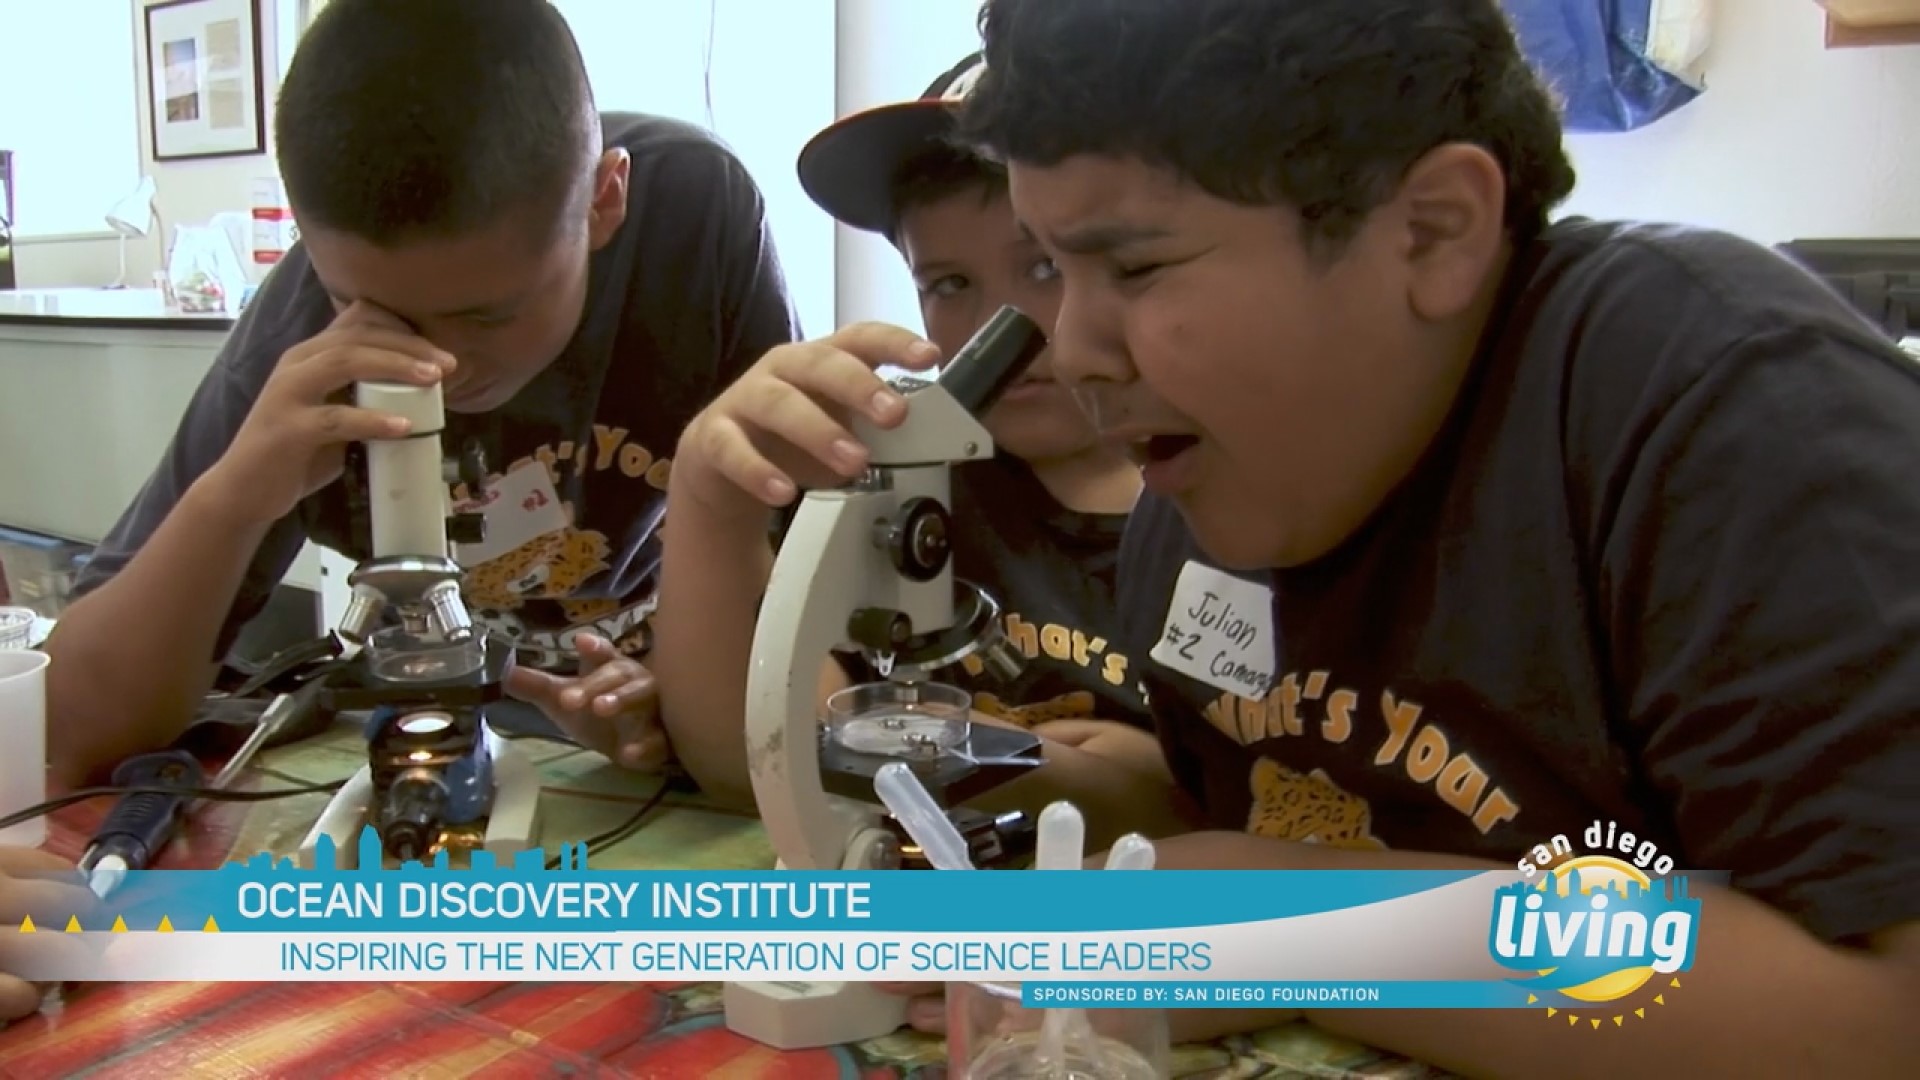 San Diego Foundation and Ocean Discovery Institute Inspiring the Next Generation of Science Leaders. Sponsored by: San Diego Foundation